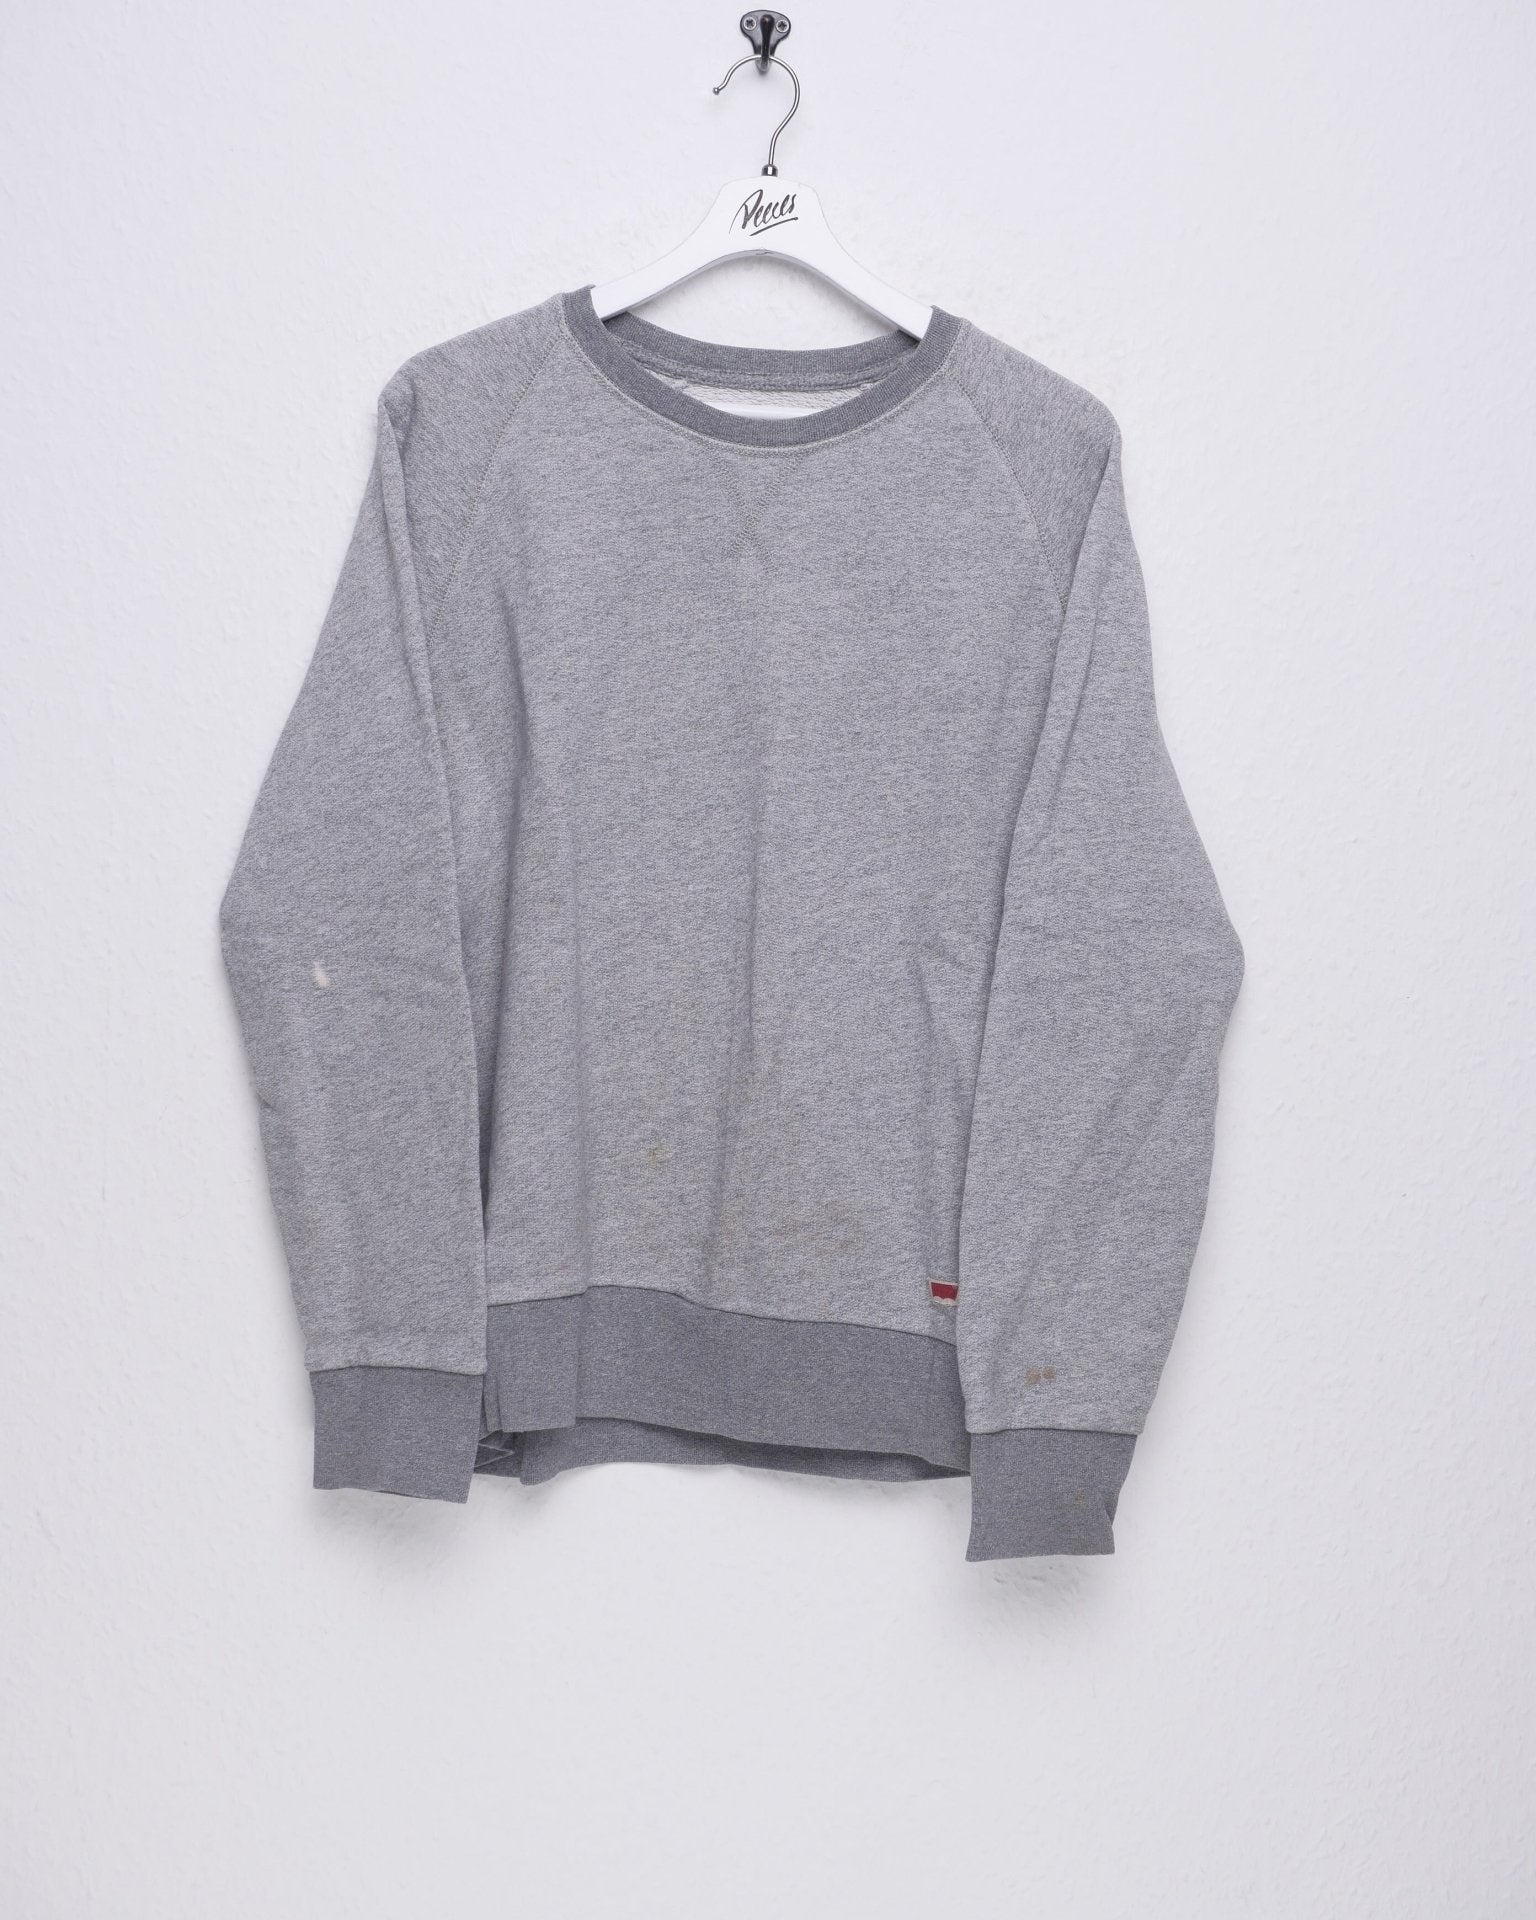 Levis embroidered Logo basic grey Sweater - Peeces